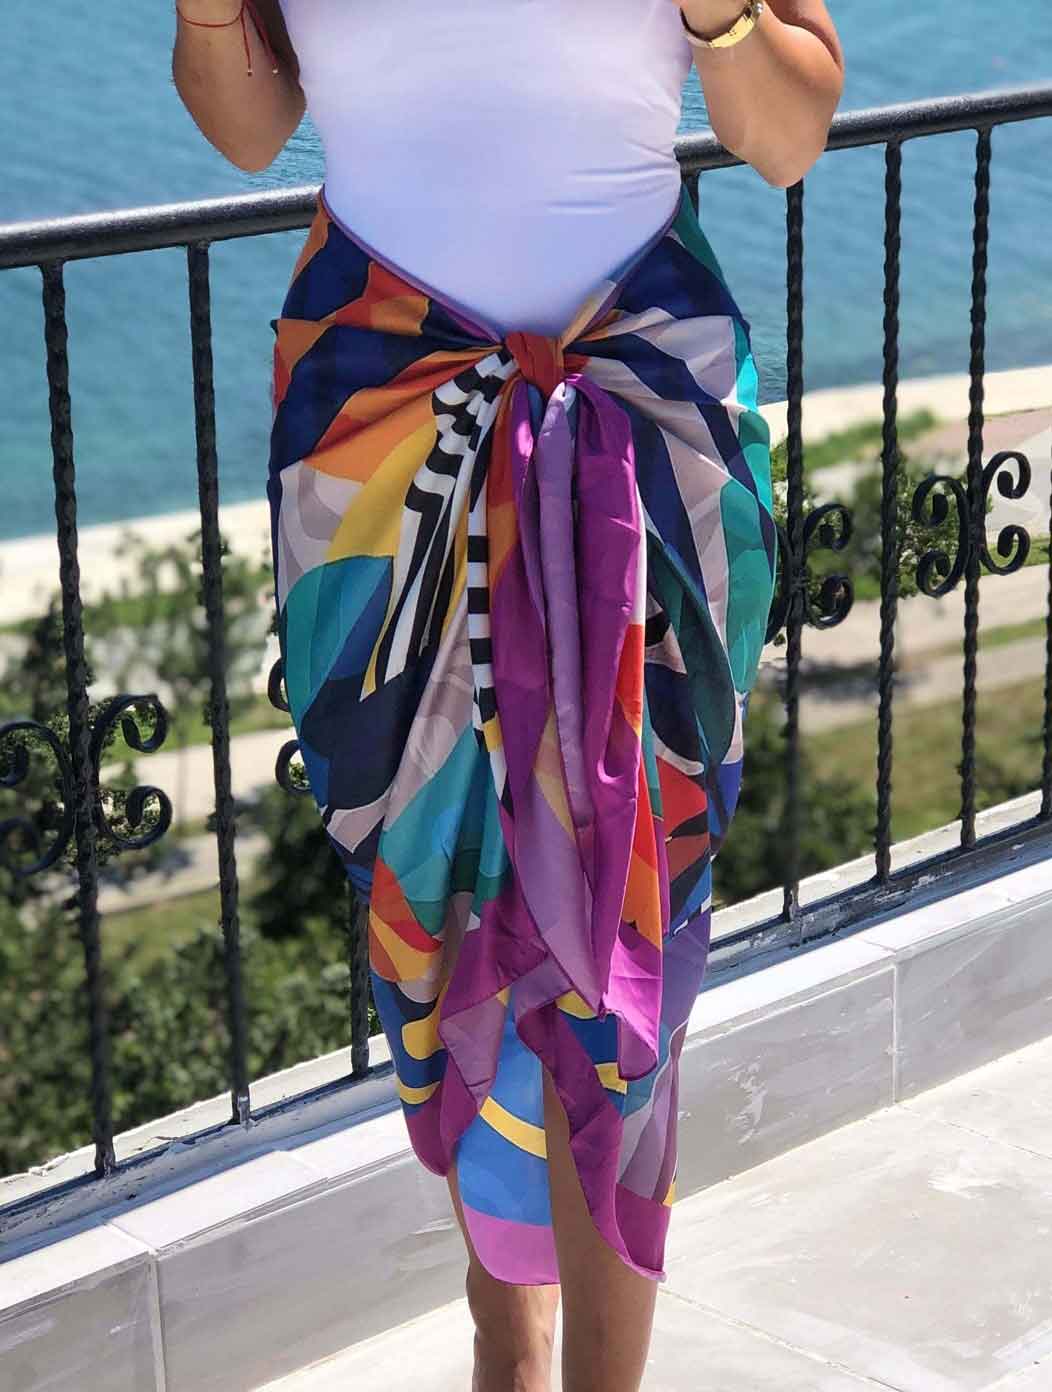 Long Multicolor Scarf, All Season Scarf, Colorful Scarf, Cover Up Scarf, Cotton Beach Wrap, Colorful Pattern Pink Green Orange Blue Scarf